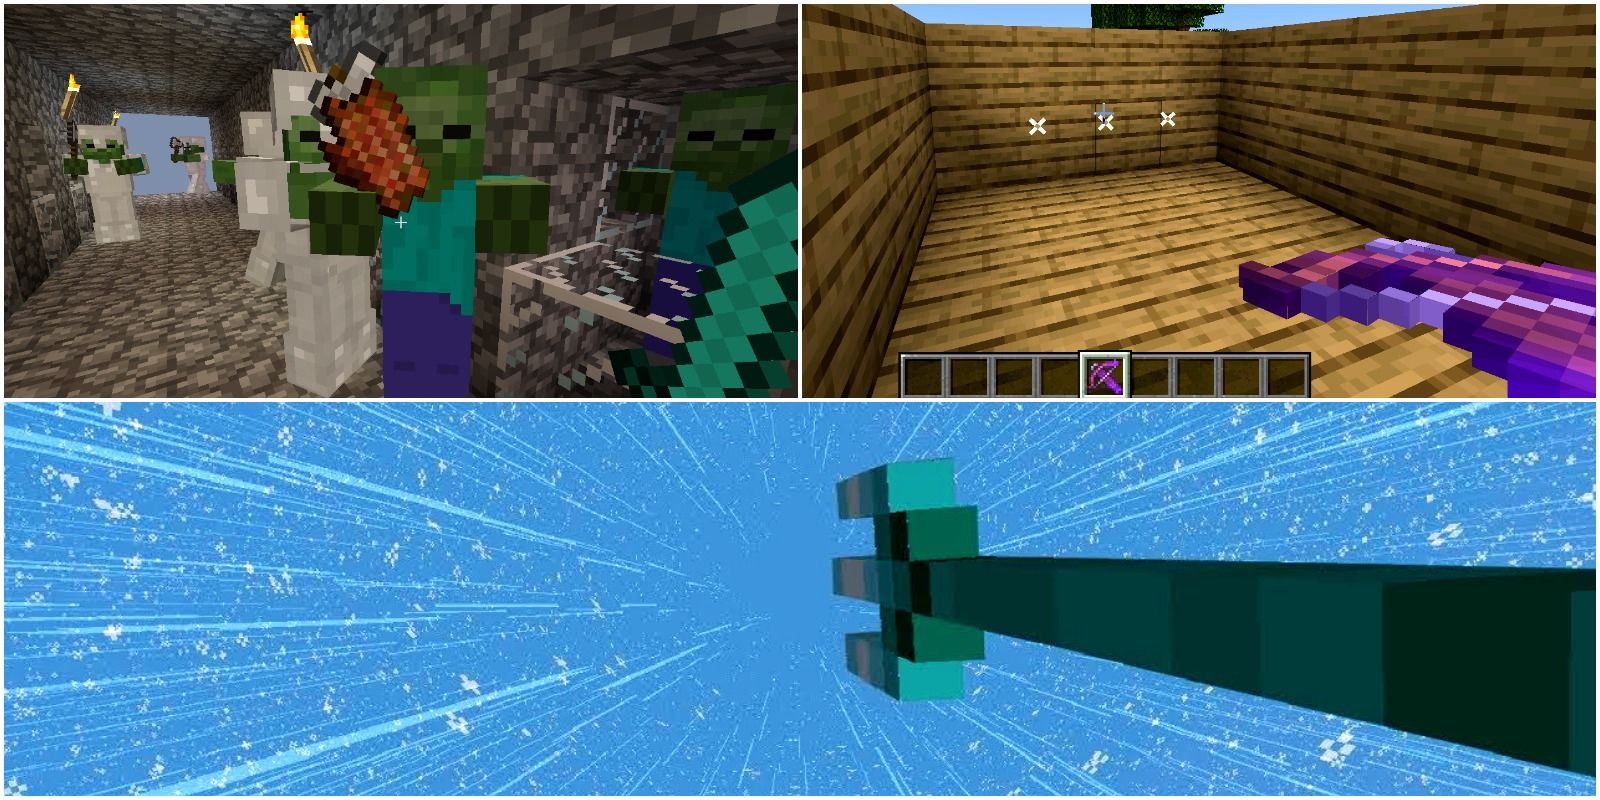 Minecraft News on X: The Curse of Binding and Curse of Vanishing